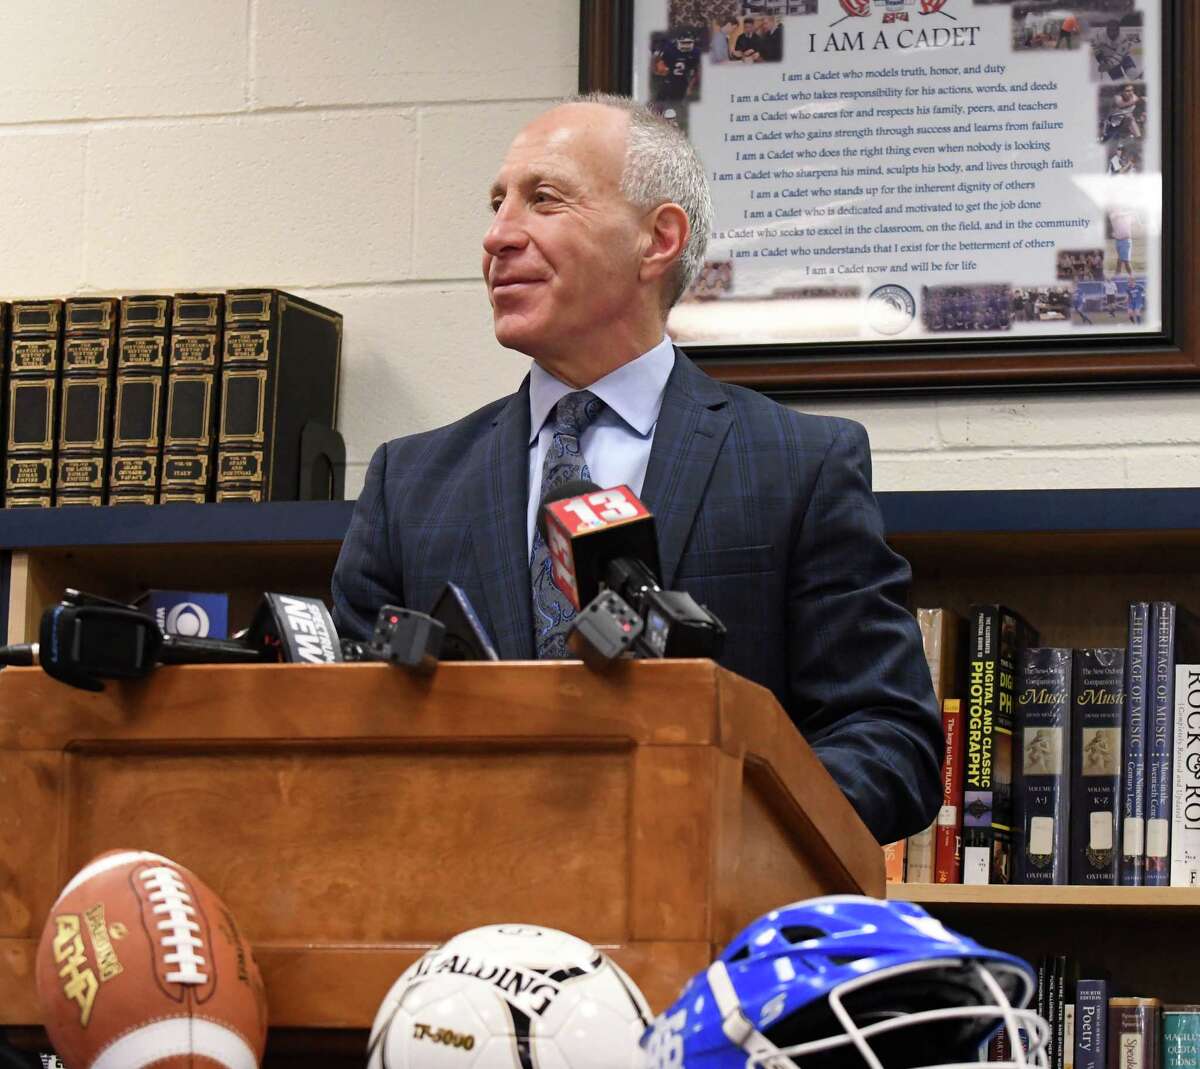 John Audino speaks during a press conference after being named head football coach at La Salle Institute on Tuesday, March 27, 2018, in Troy, N.Y. Audino joins La Salle from Columbia University where he was the Passing Game Coordinator/Running Backs coach. Previously he was the head coach at Union College where he led the Dutchmen to five NCAA Division III playoff appearances, four Liberty League titles and five ECAC Northwest Championships. (Will Waldron/Times Union)